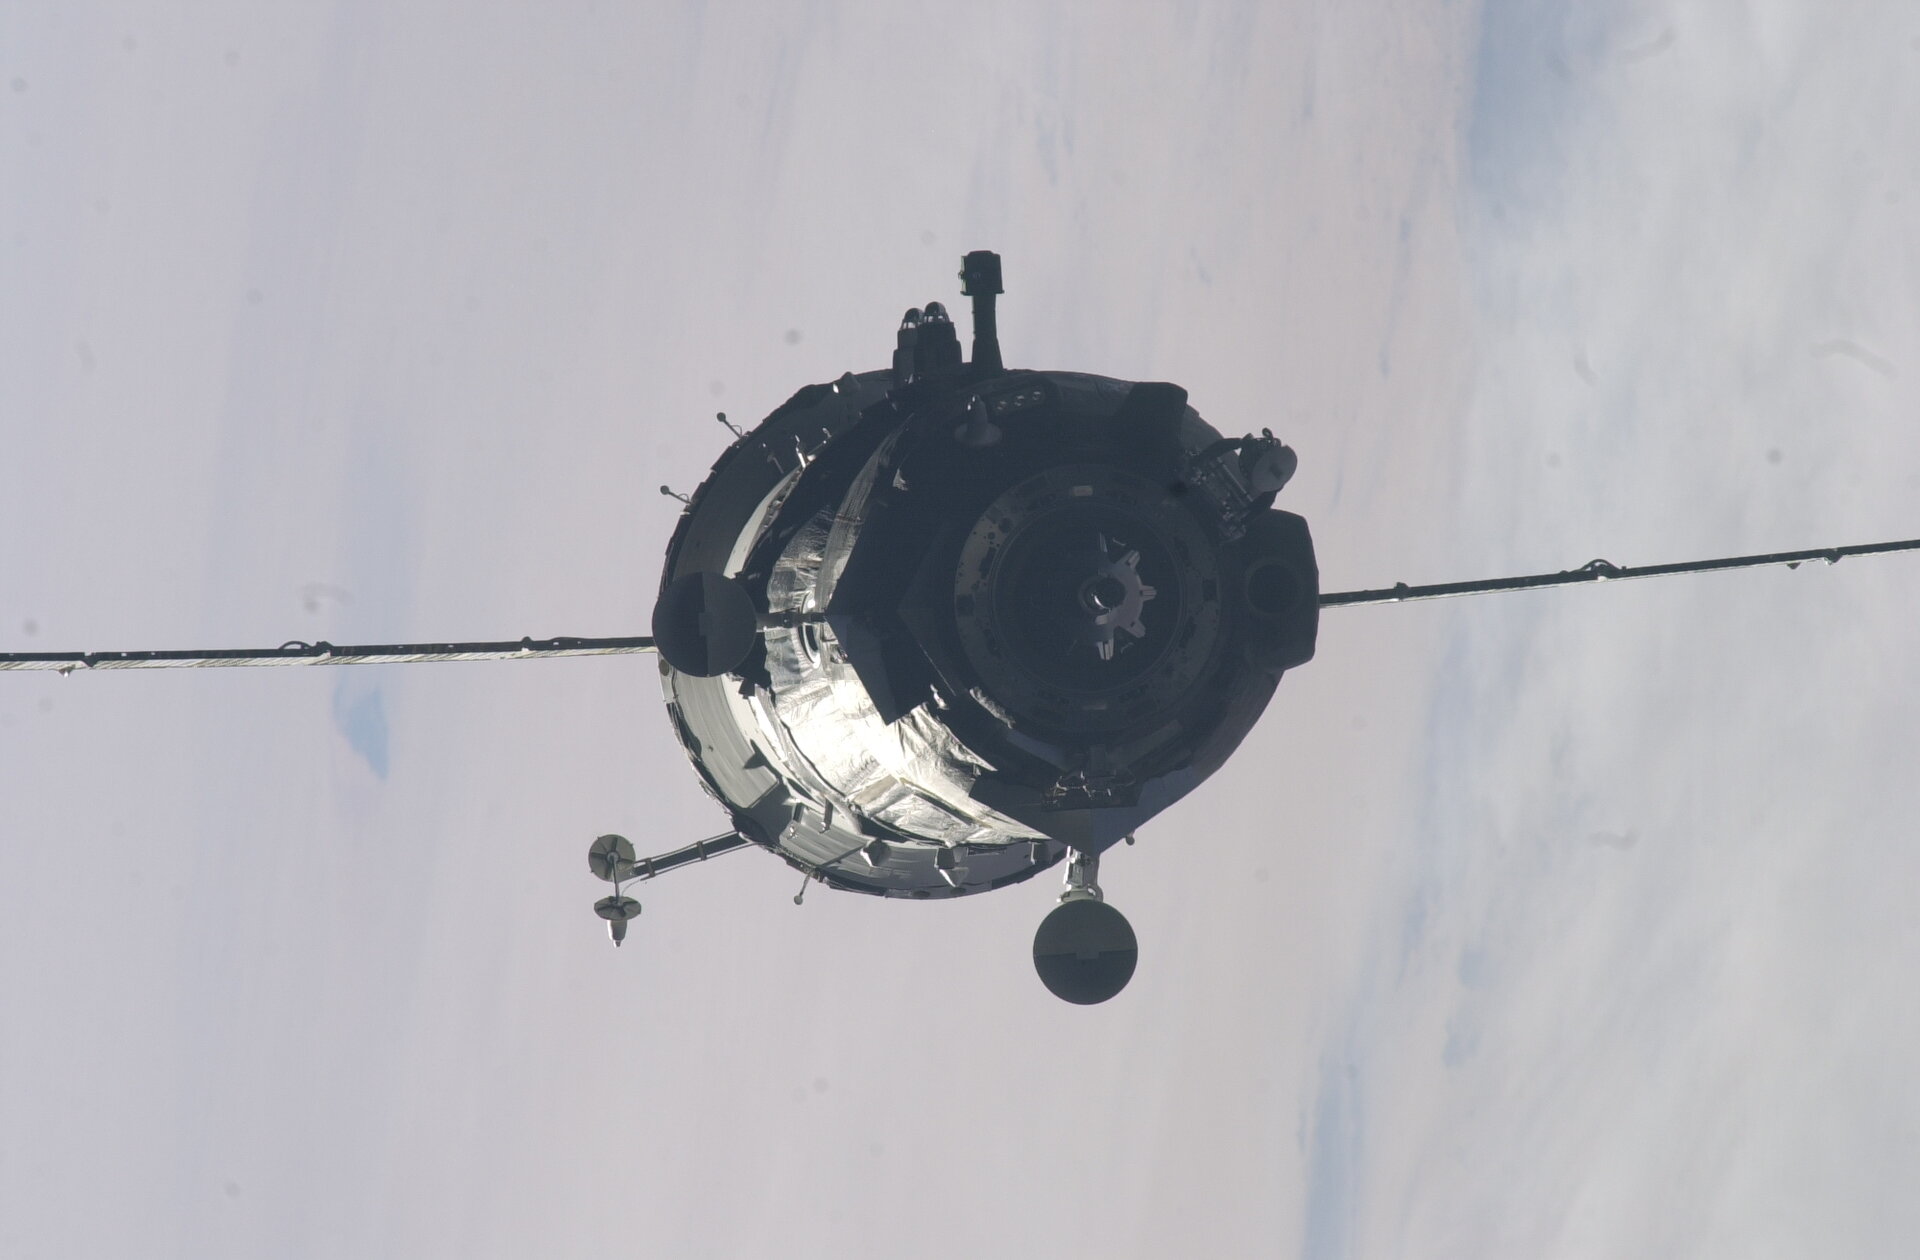 Our Soyuz gets closer to ISS